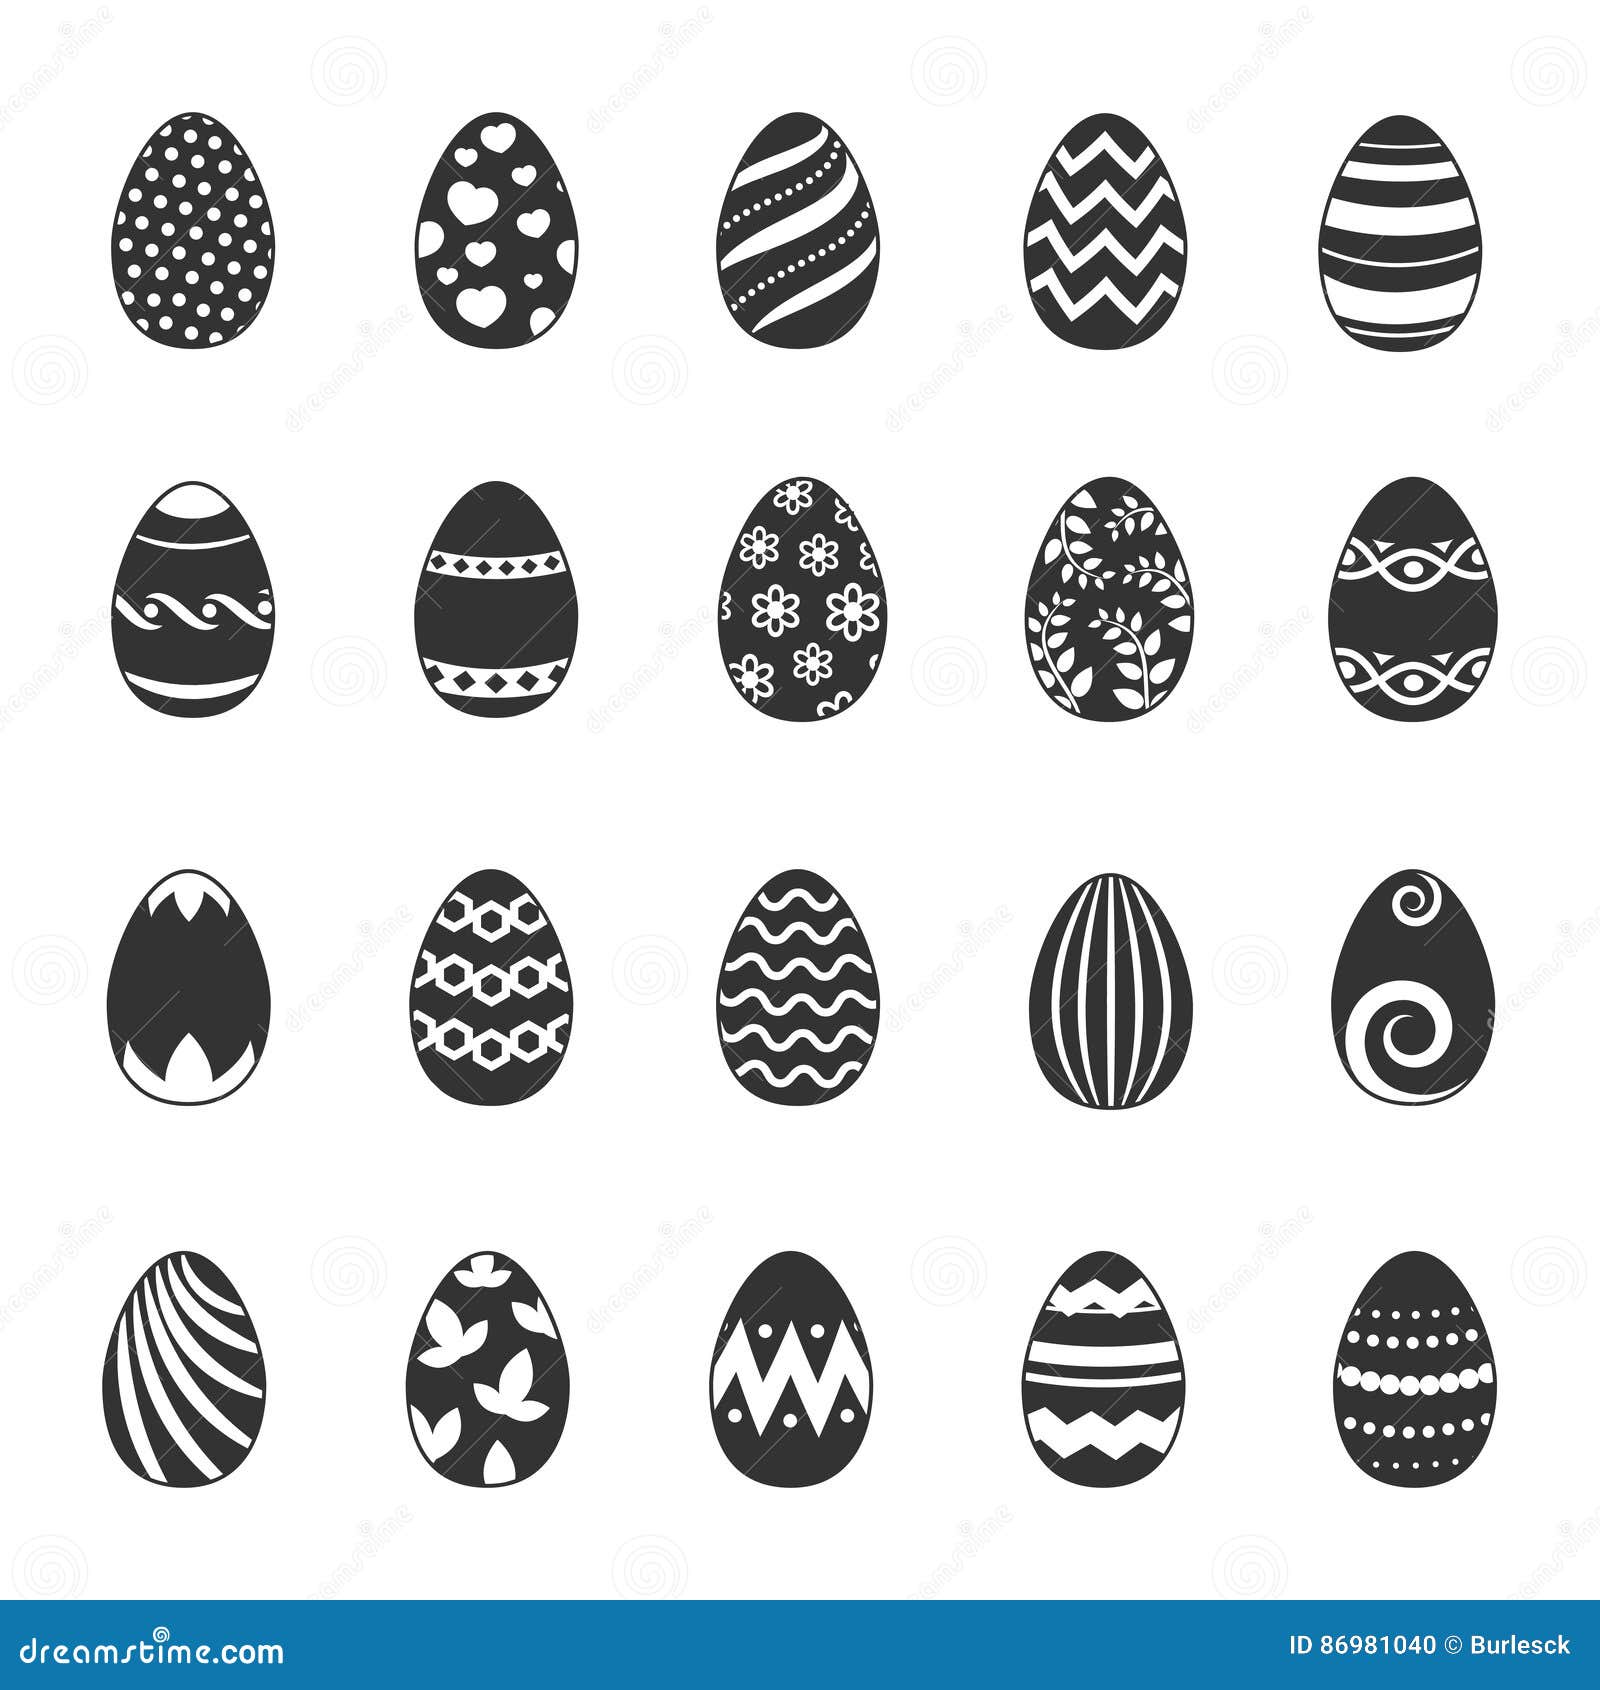 paschal egg icons.  easter eggs with flowers, lines and curls patterns